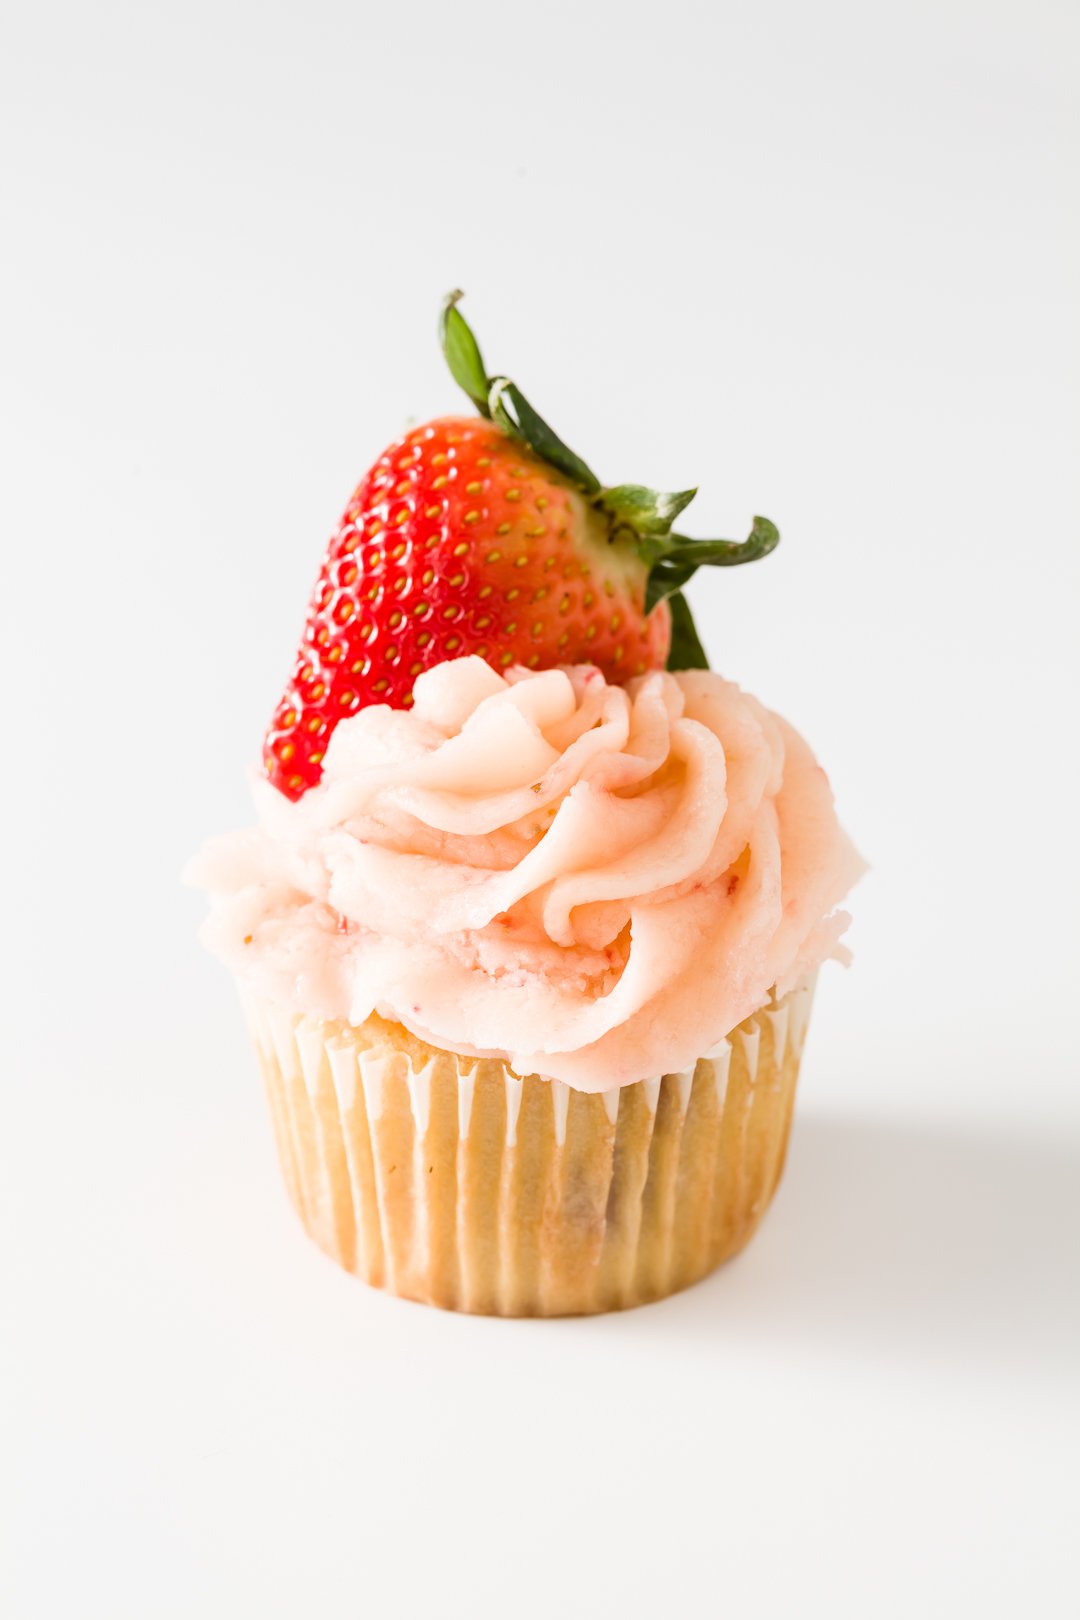 a cupcake frosted with strawberry buttercream frosting and topped with a strawberry